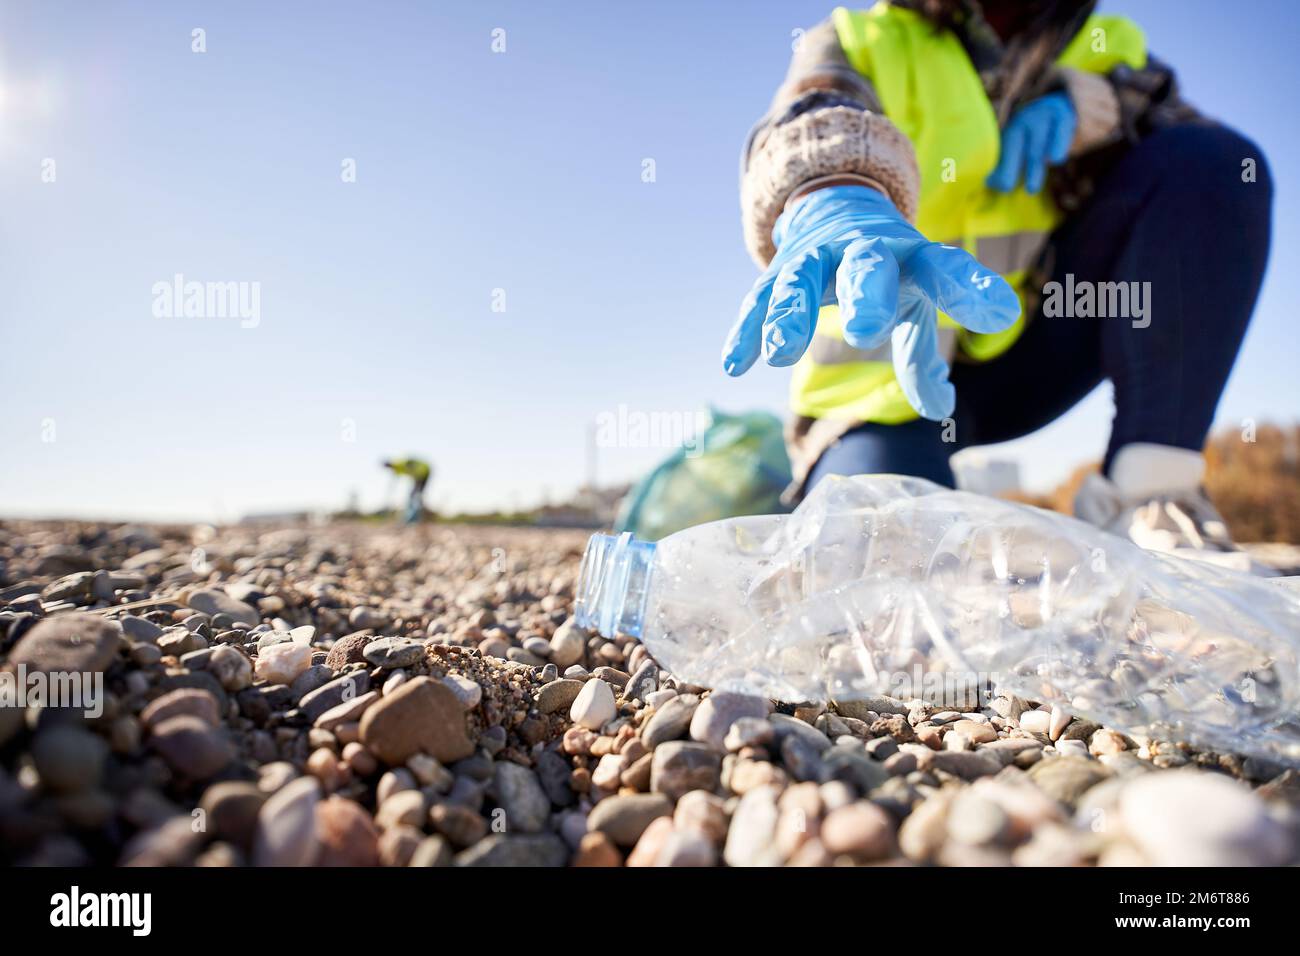 Group of cleanup volunteers cleaning up waste in nature and holding a garbage bag trash Stock Photo